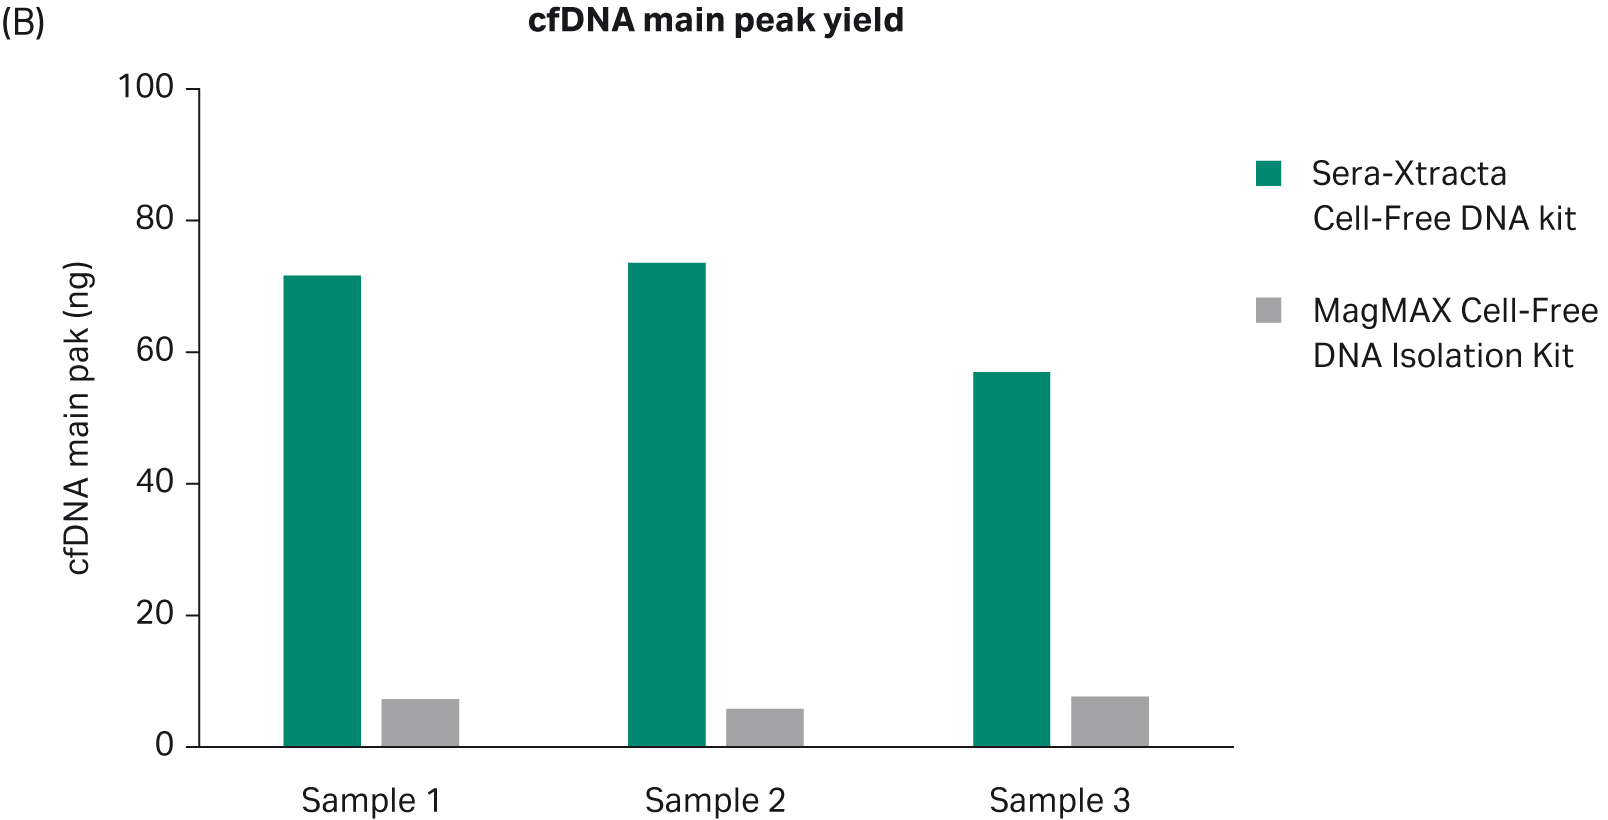 Bar chart summarizing cfDNA recovery from serum calculated using smear analysis tool (2100 Expert software) for fragments between 130-260 bp following capillary electrophoresis on a 7500 DNA chip.